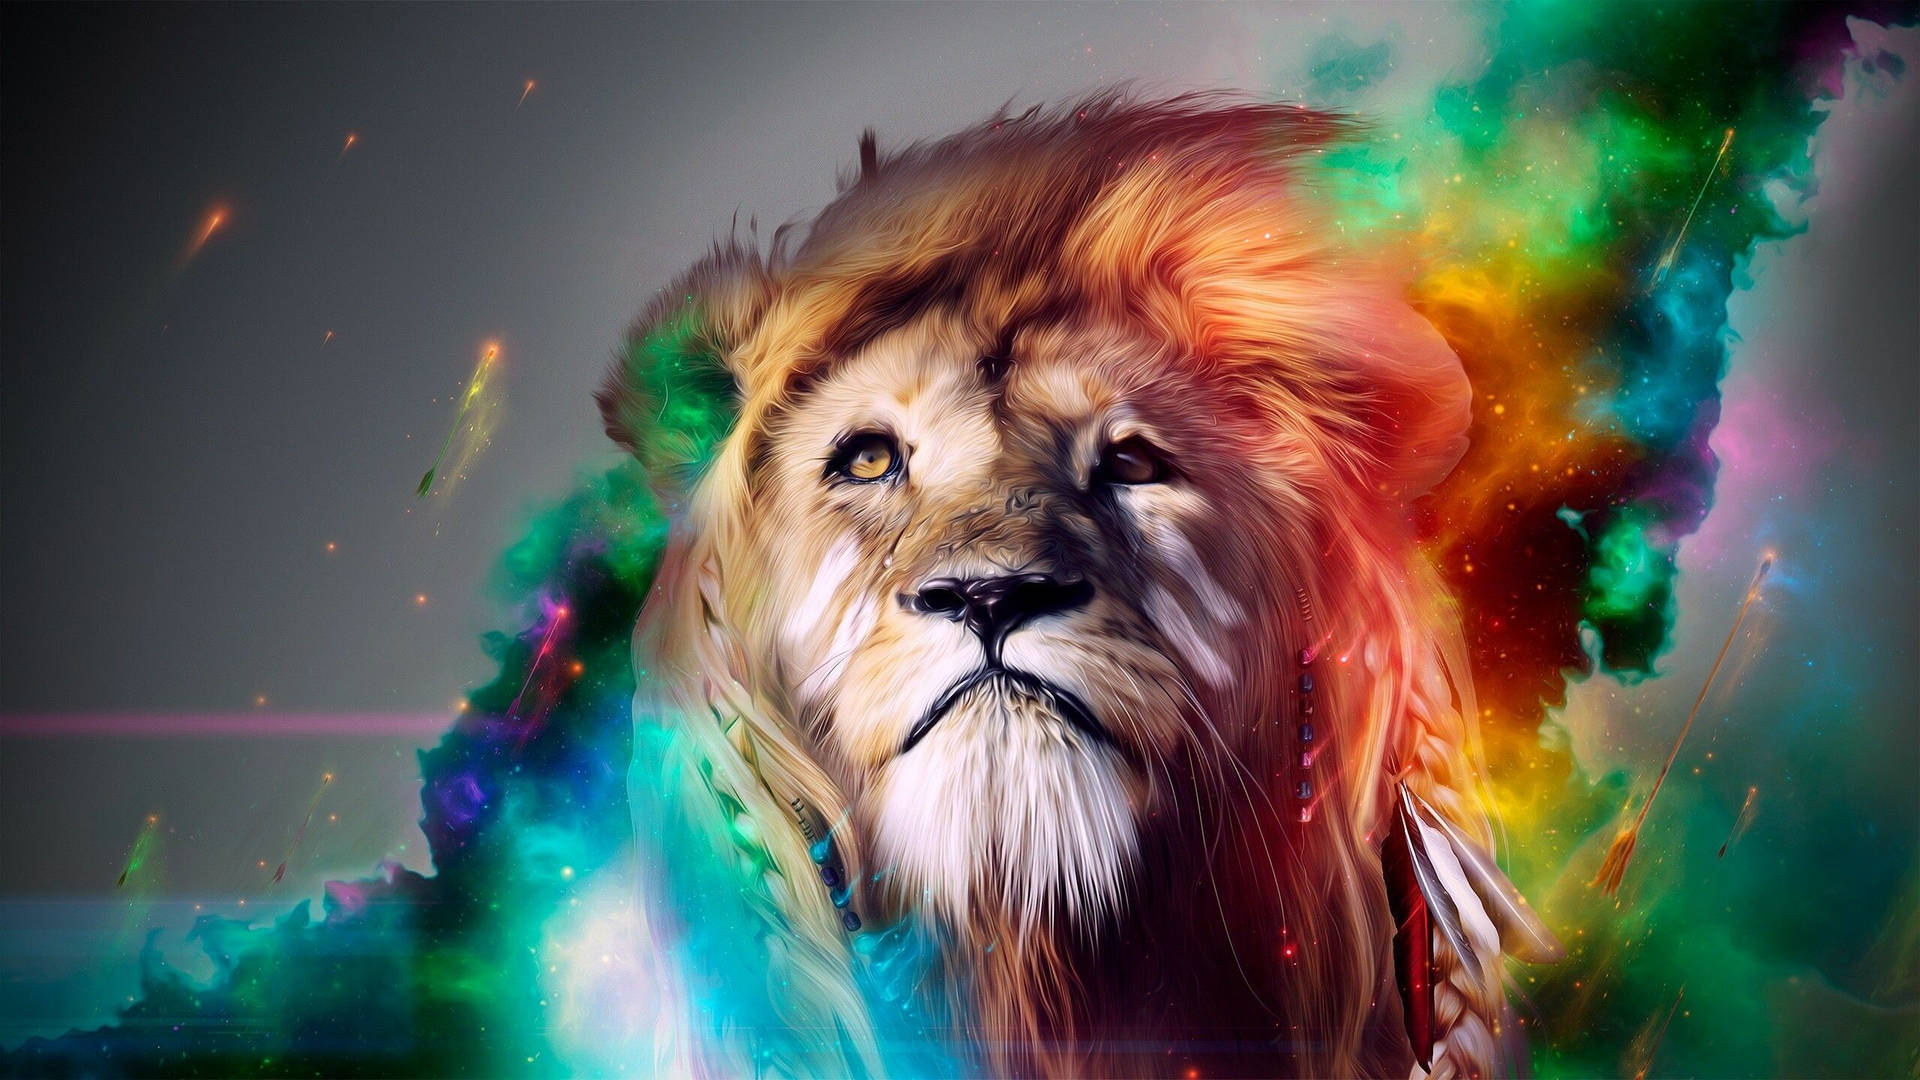 Cool Picture Art Of Lion